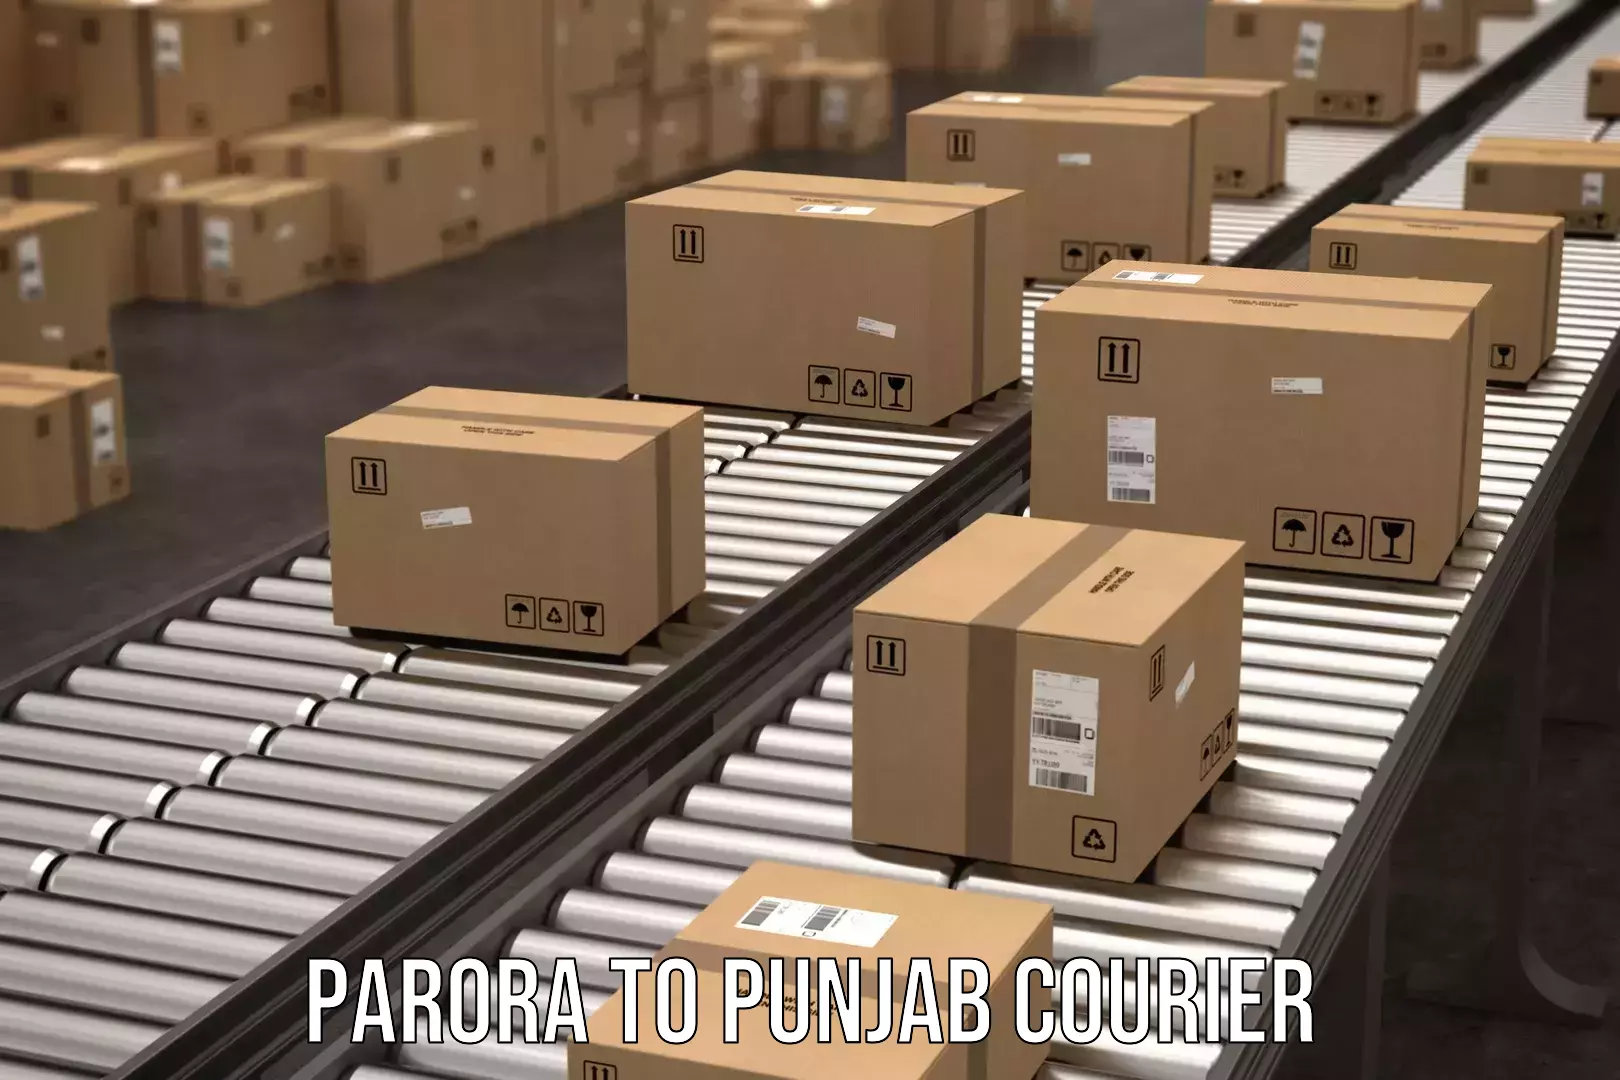 Easy access courier services Parora to Punjab